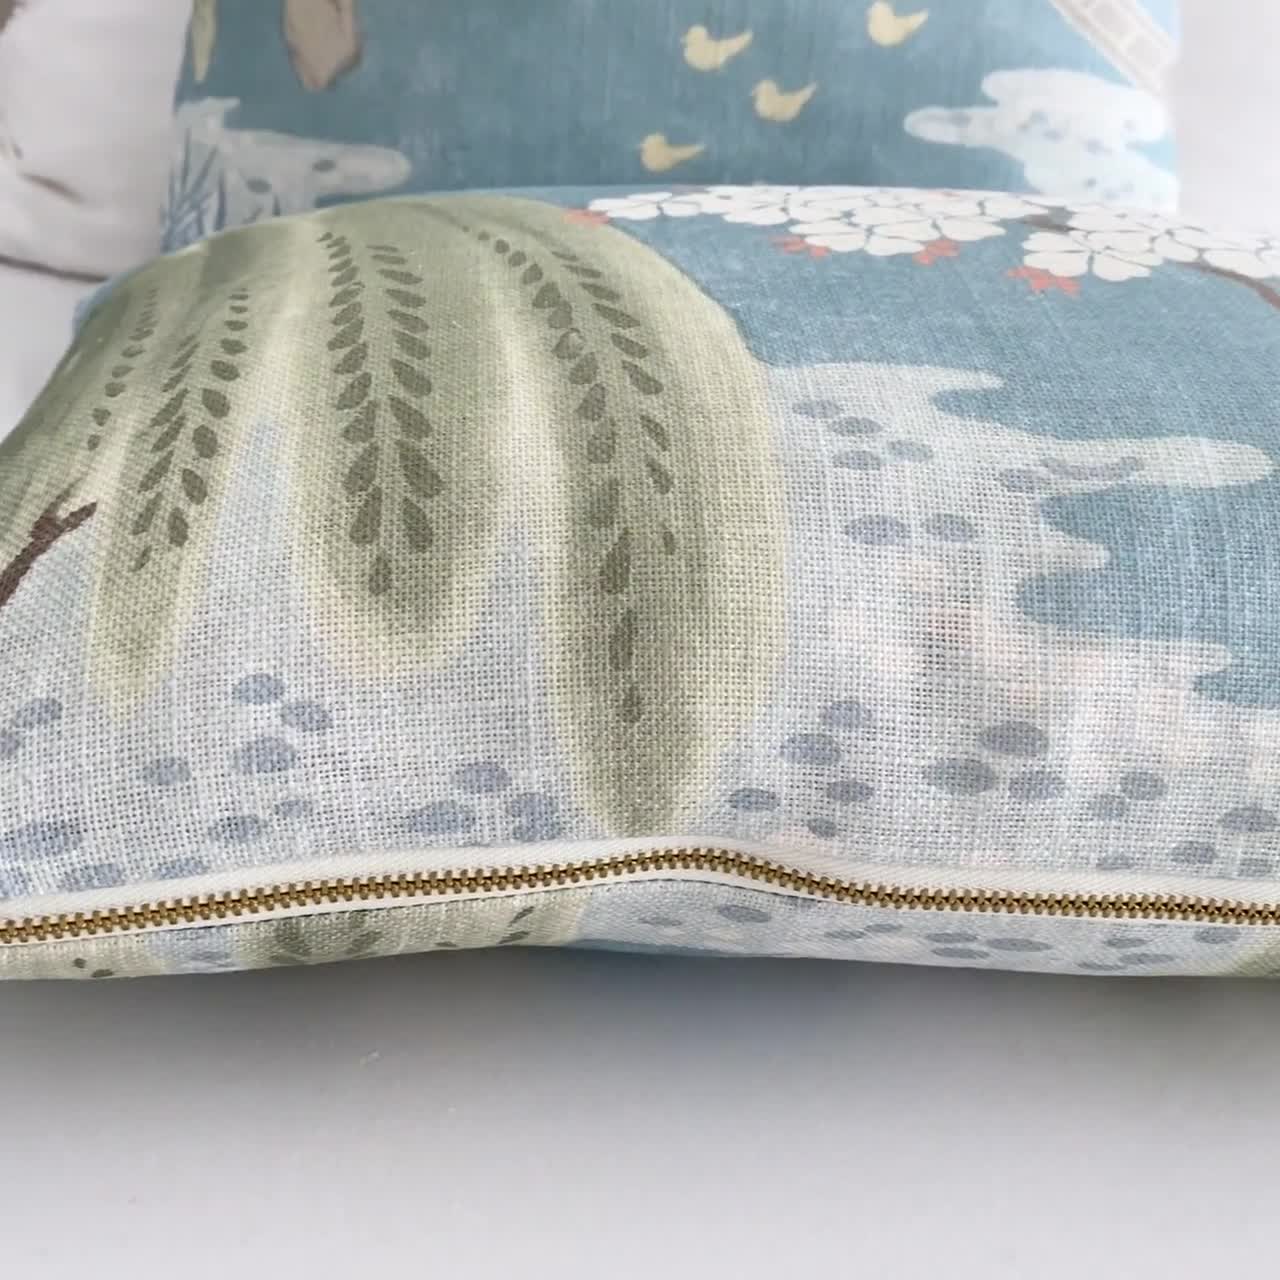 https://v.etsystatic.com/video/upload/q_auto/Thibaut-Willow-Tree-AF23109-Turquoise-Blue-Chinoiserie-Printed-Floral-Decorative-Throw-Pillow-Cover-Product-Video_yapsr6.jpg